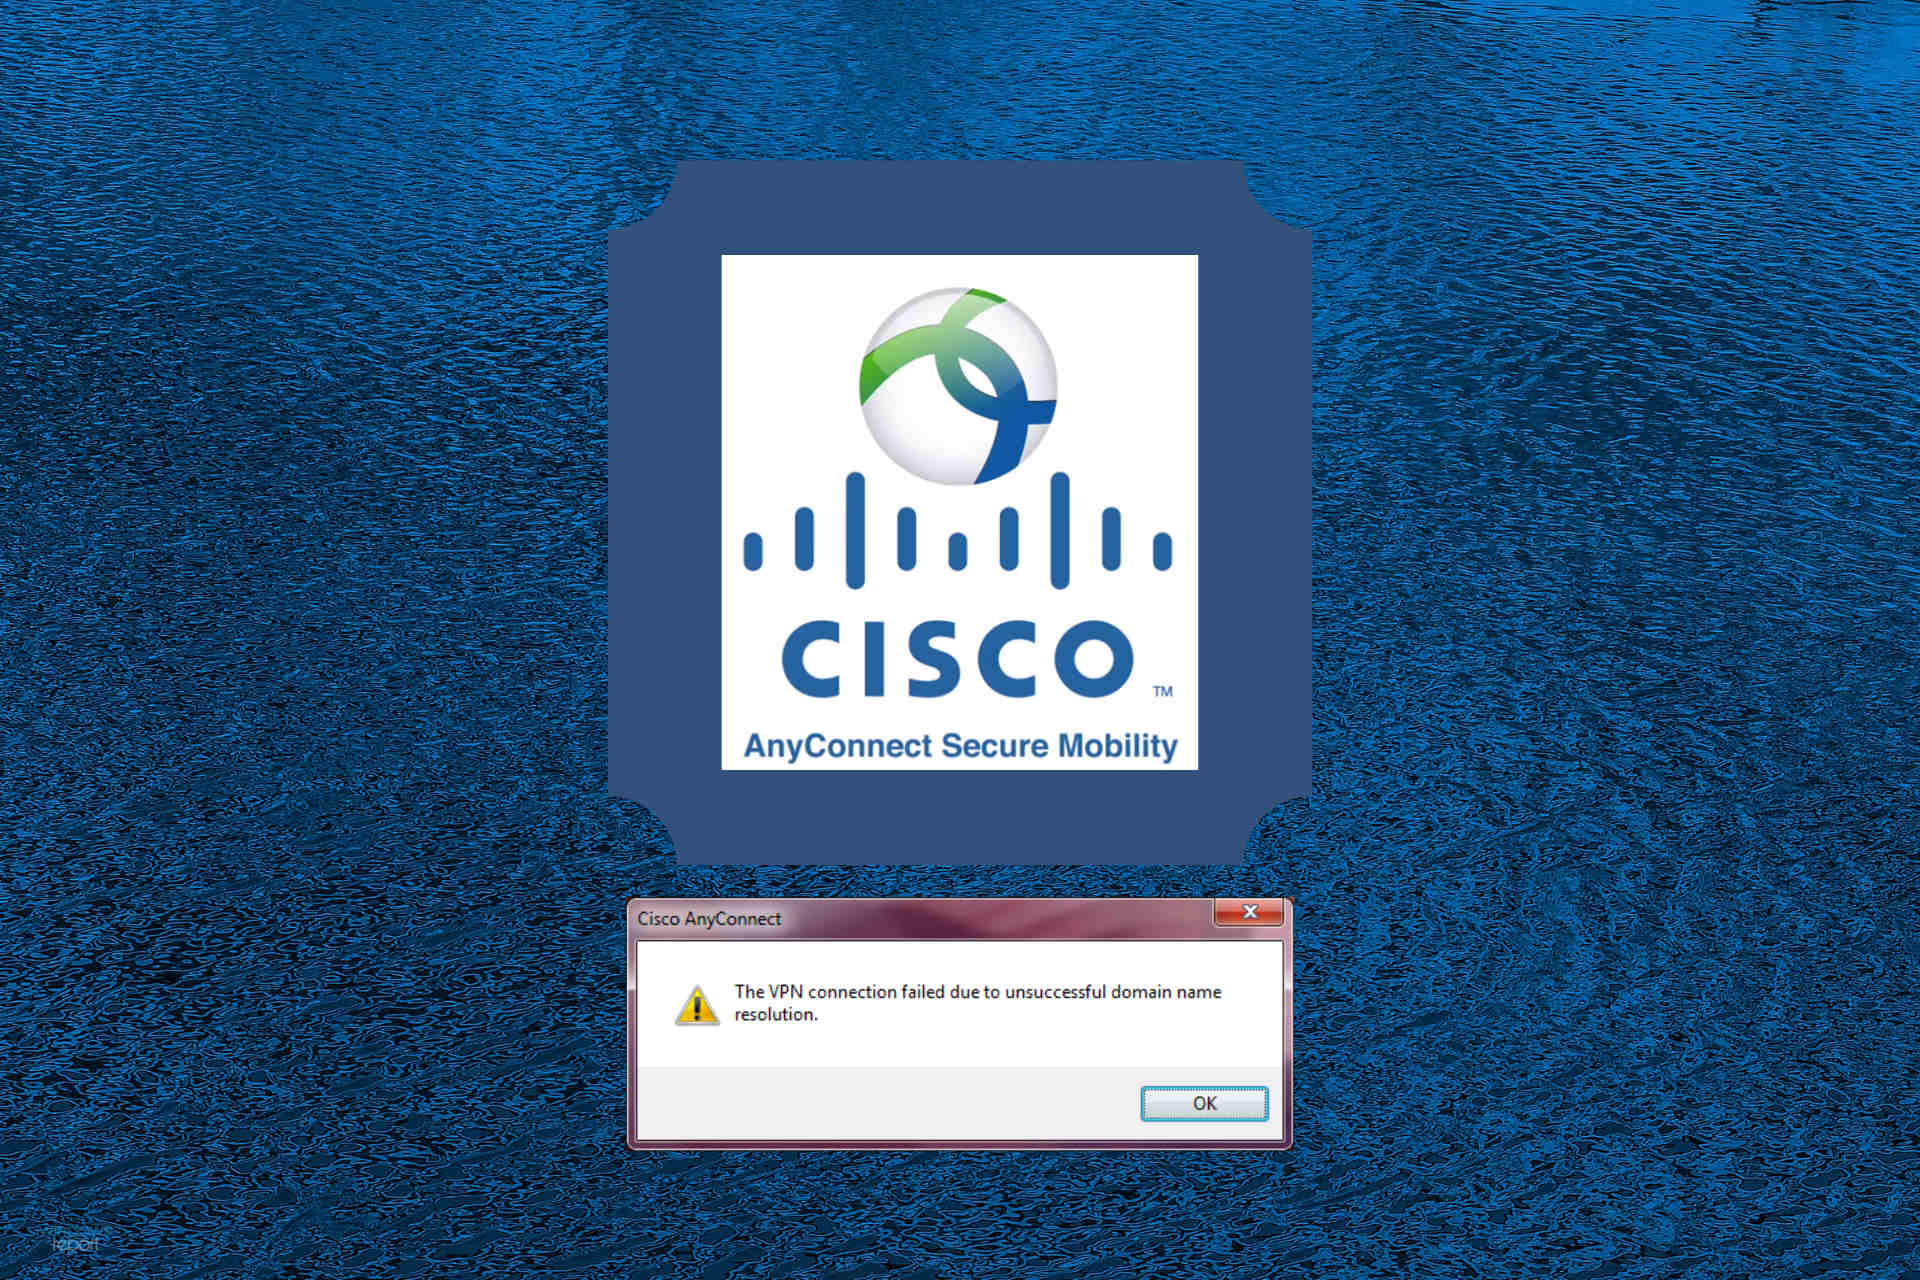 cisco anyconnect could not connect to server